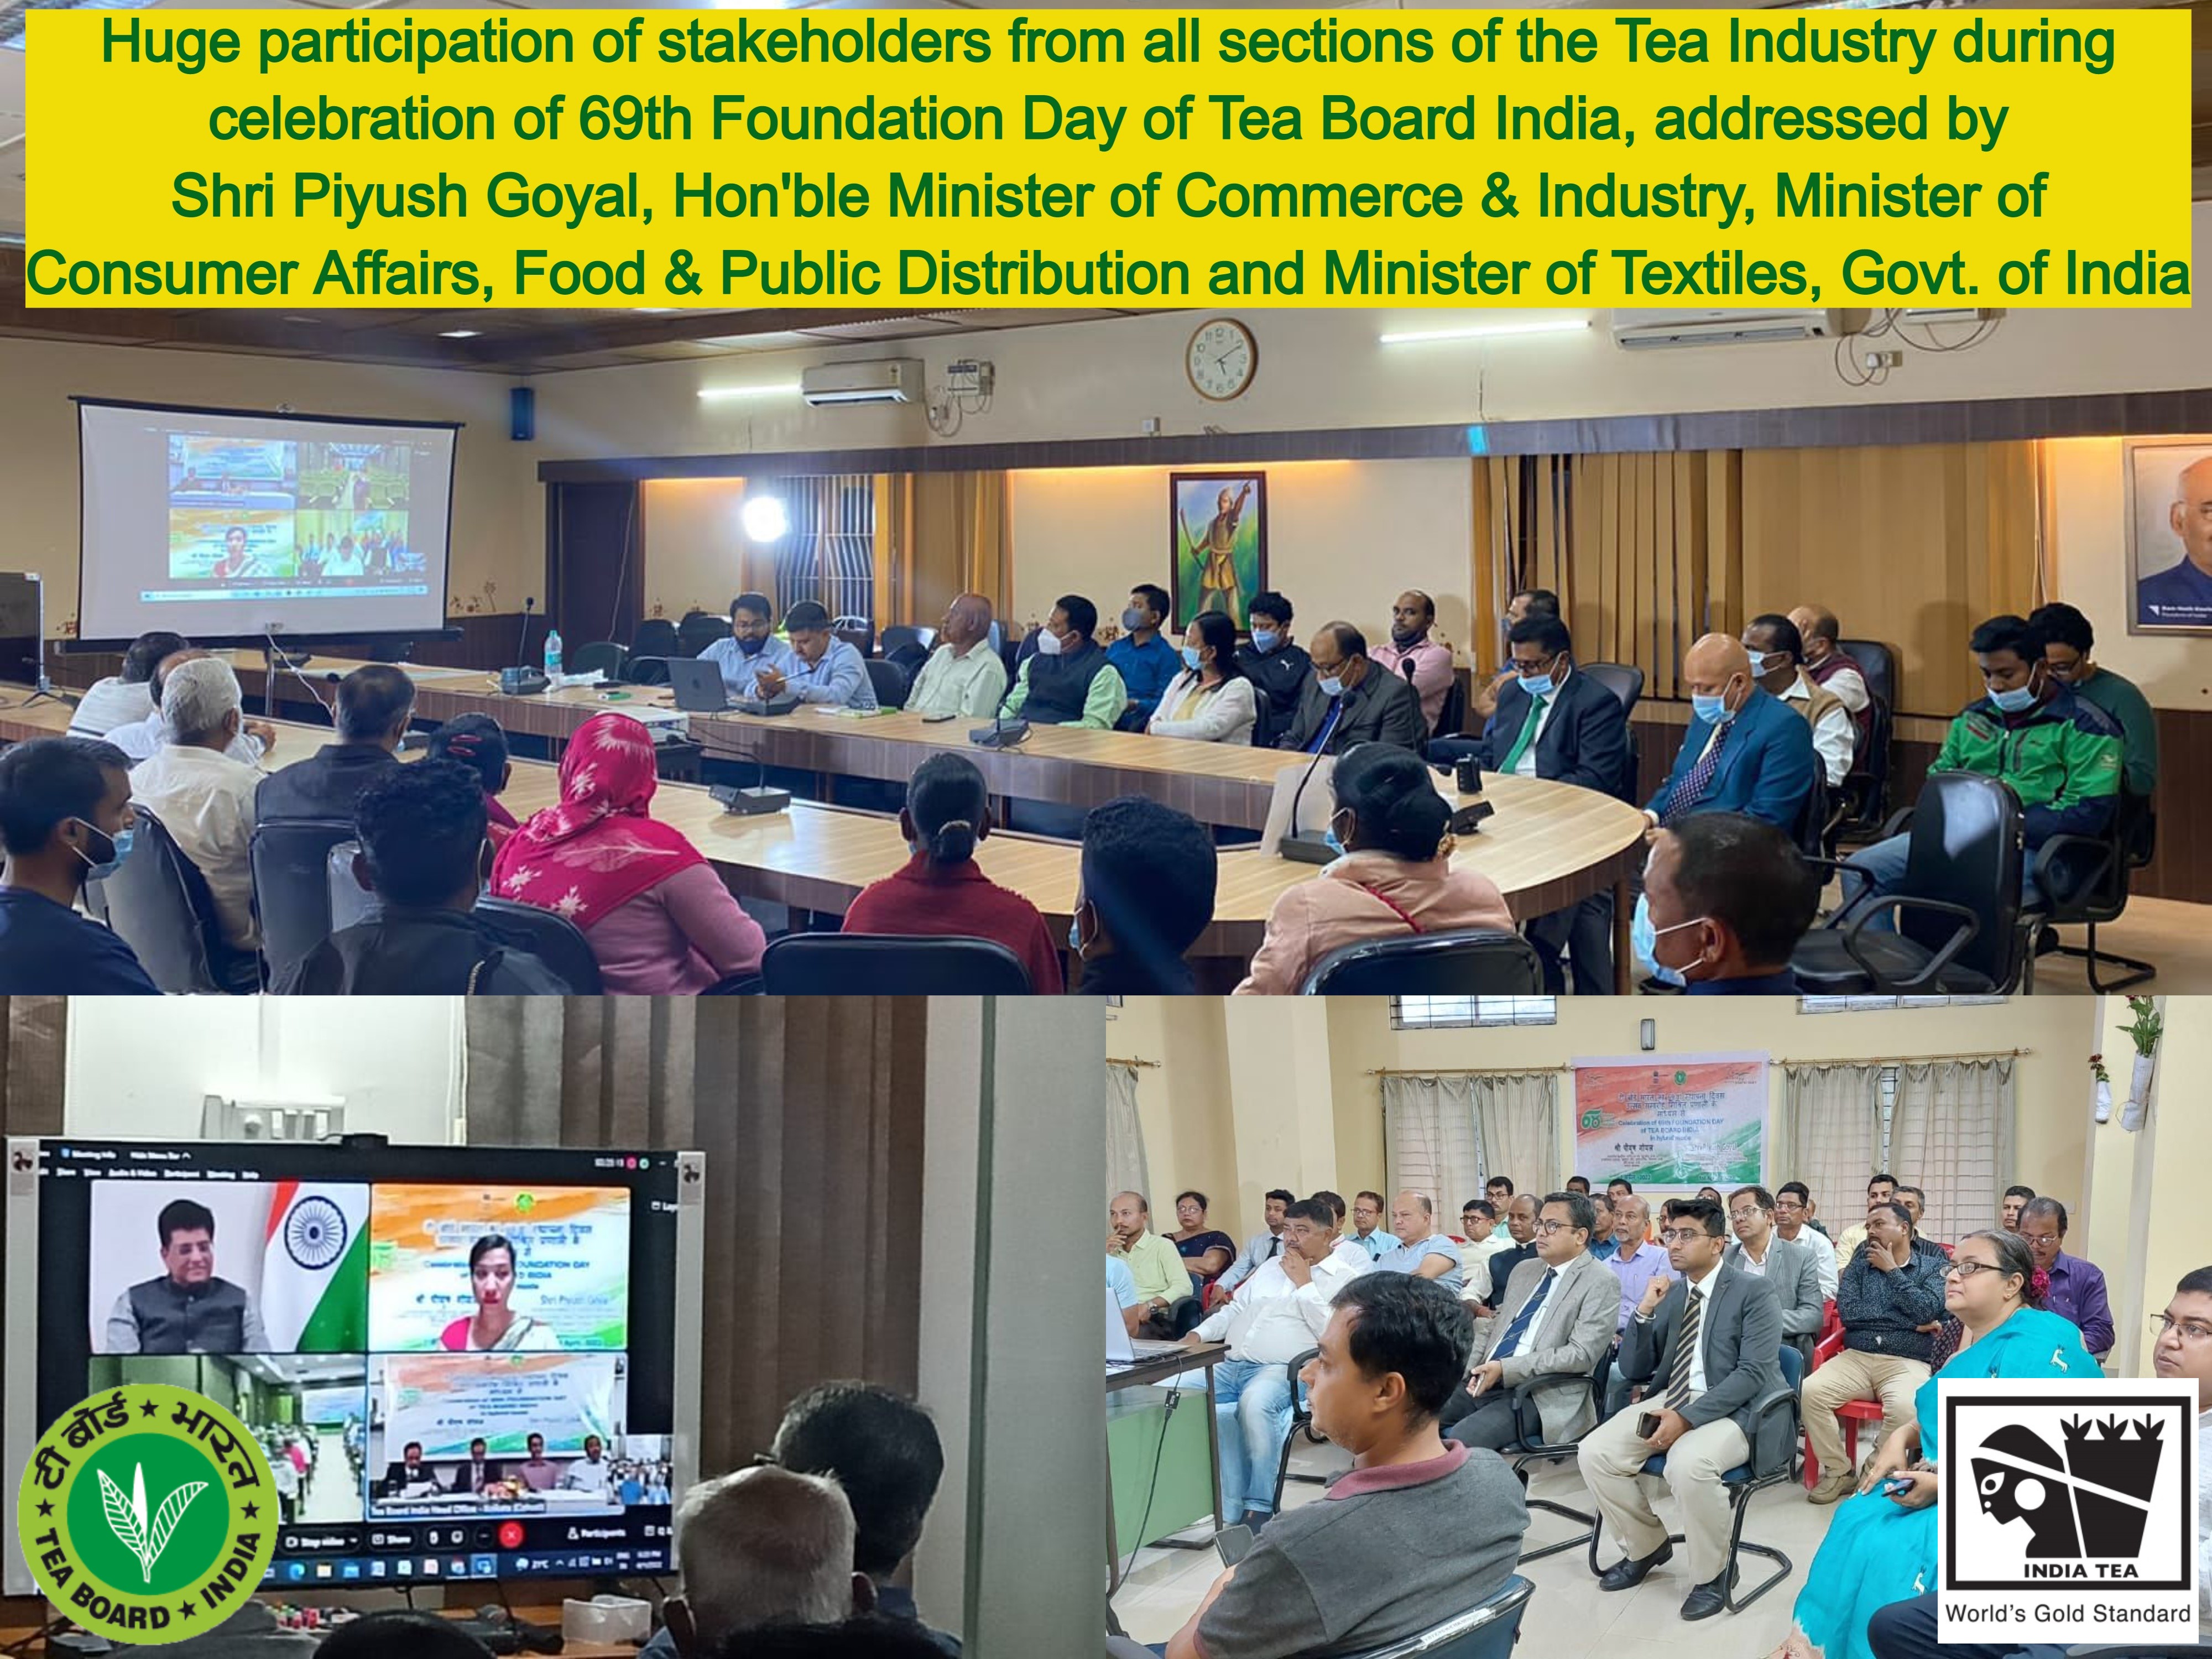 Huge participation of stakeholders from all sections of the Tea Industry during celebration of 69th Foundation Day of Tea Board India, addressed by Shri Piyush Goyal, Hon'ble Minister of Commerce & Industry, Minister of Consumer Affairs, Food & Public Distribution and Minister of Textiles, Govt. of India